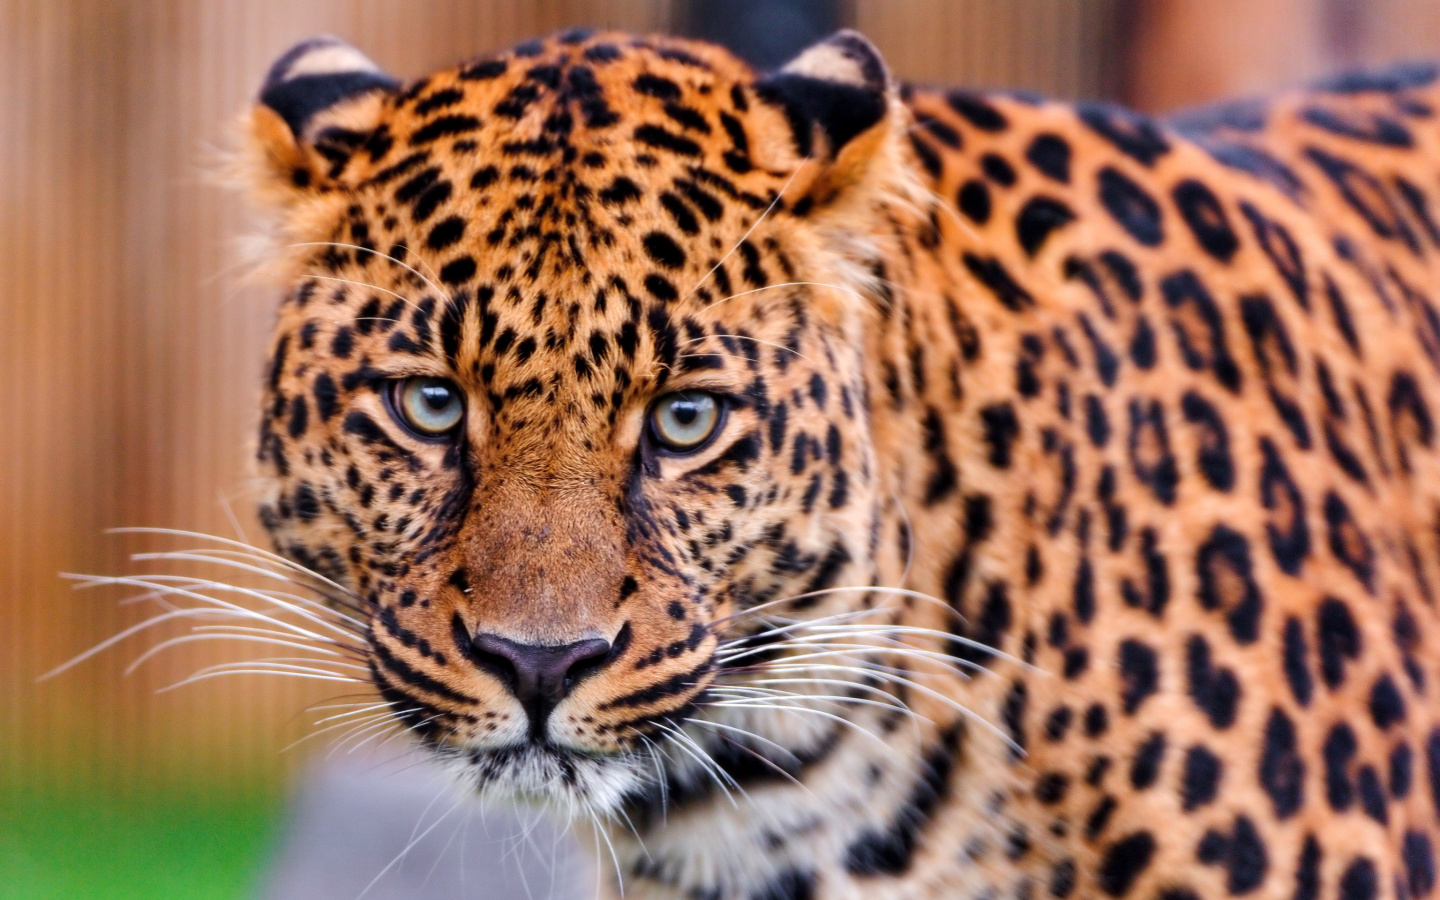 Leopard, National Geographic wallpaper 1440x900